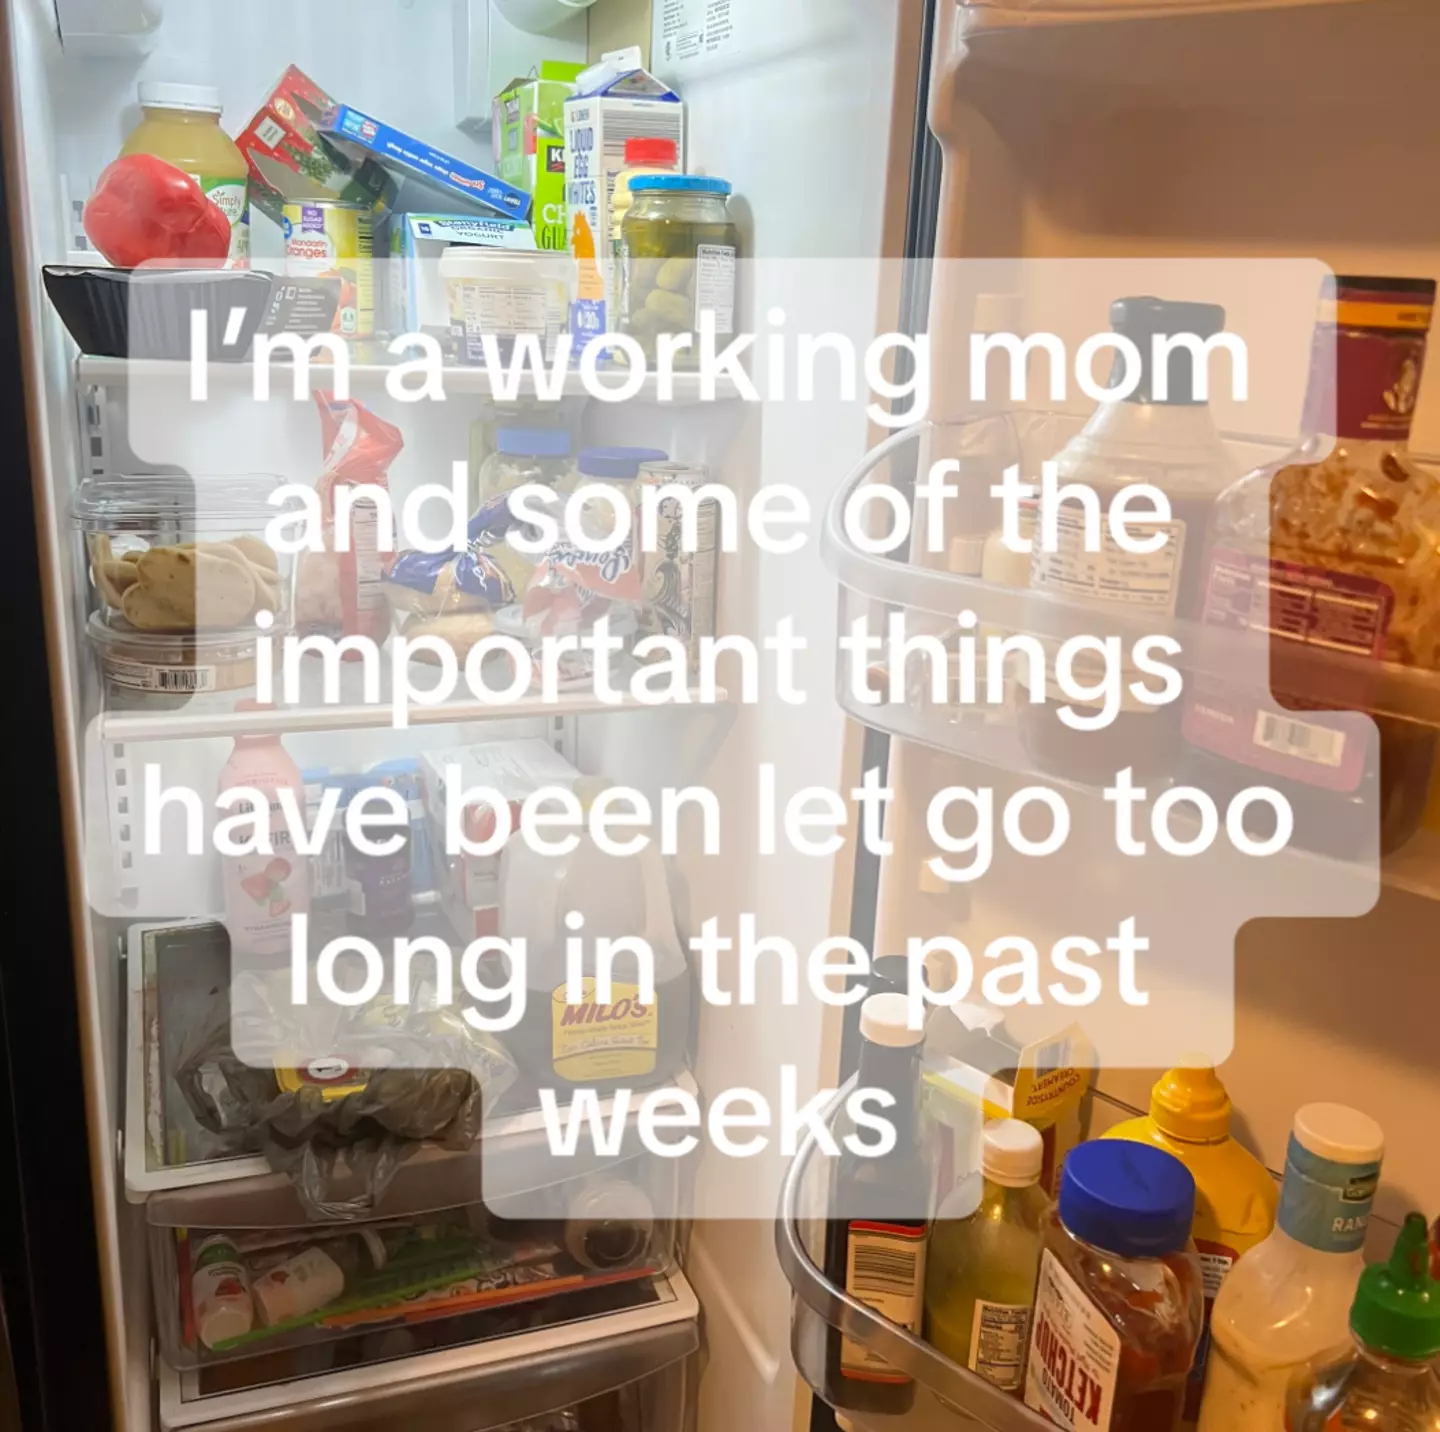 The mum explained she struggles to get things done.